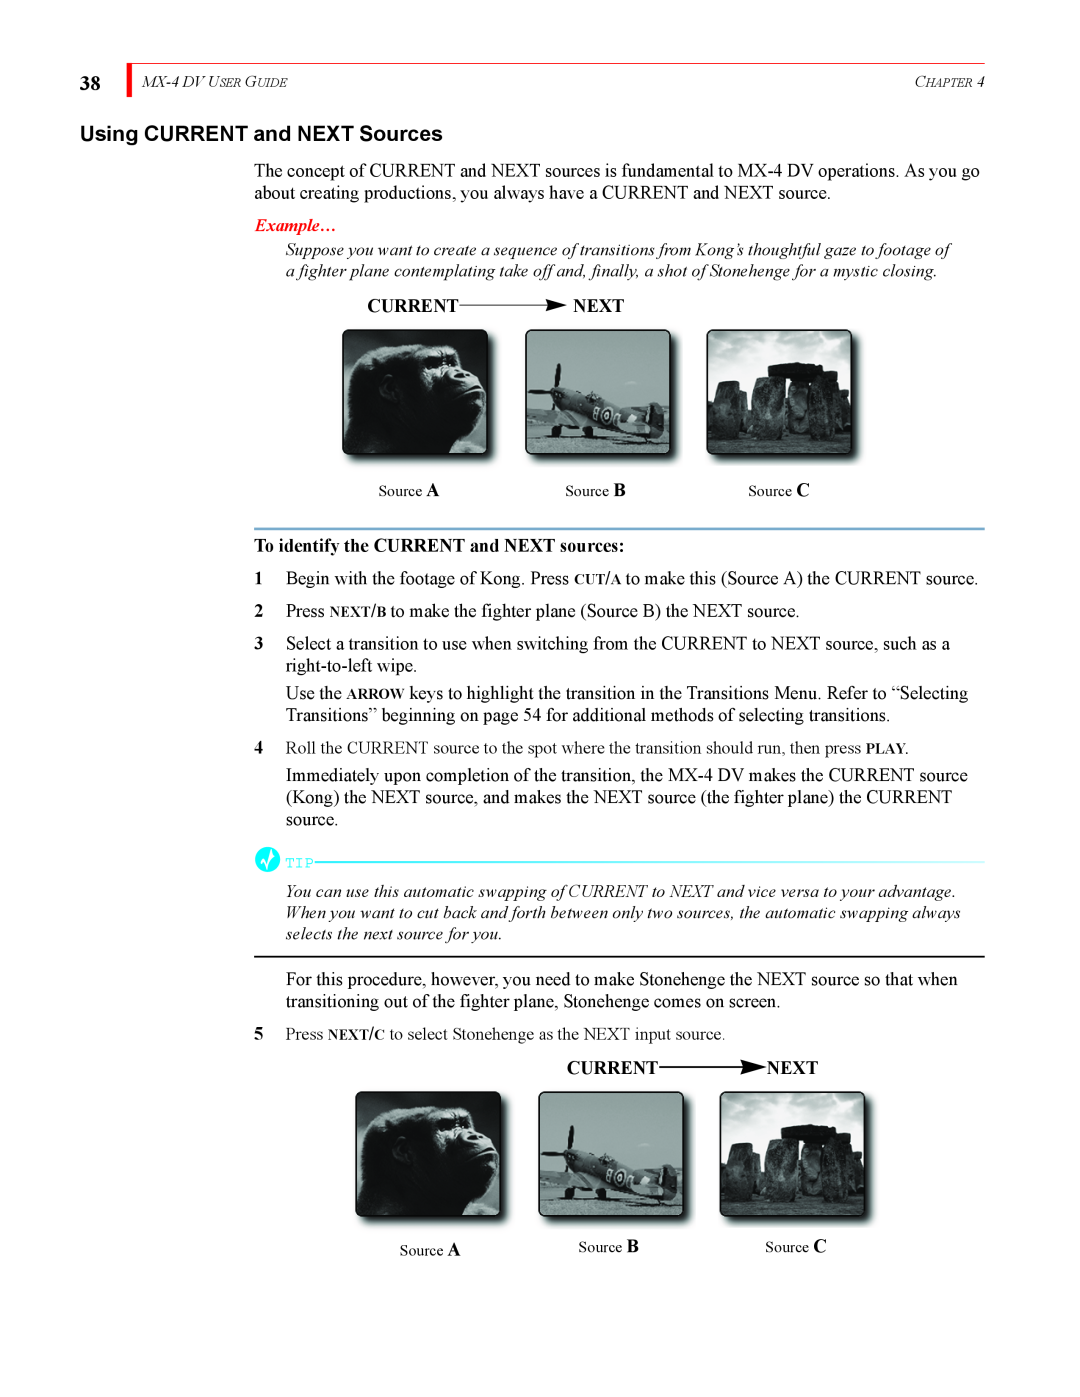 FOCUS Enhancements MX-4DV manual Using CURRENT and NEXT Sources, Current Next, To identify the CURRENT and NEXT sources 